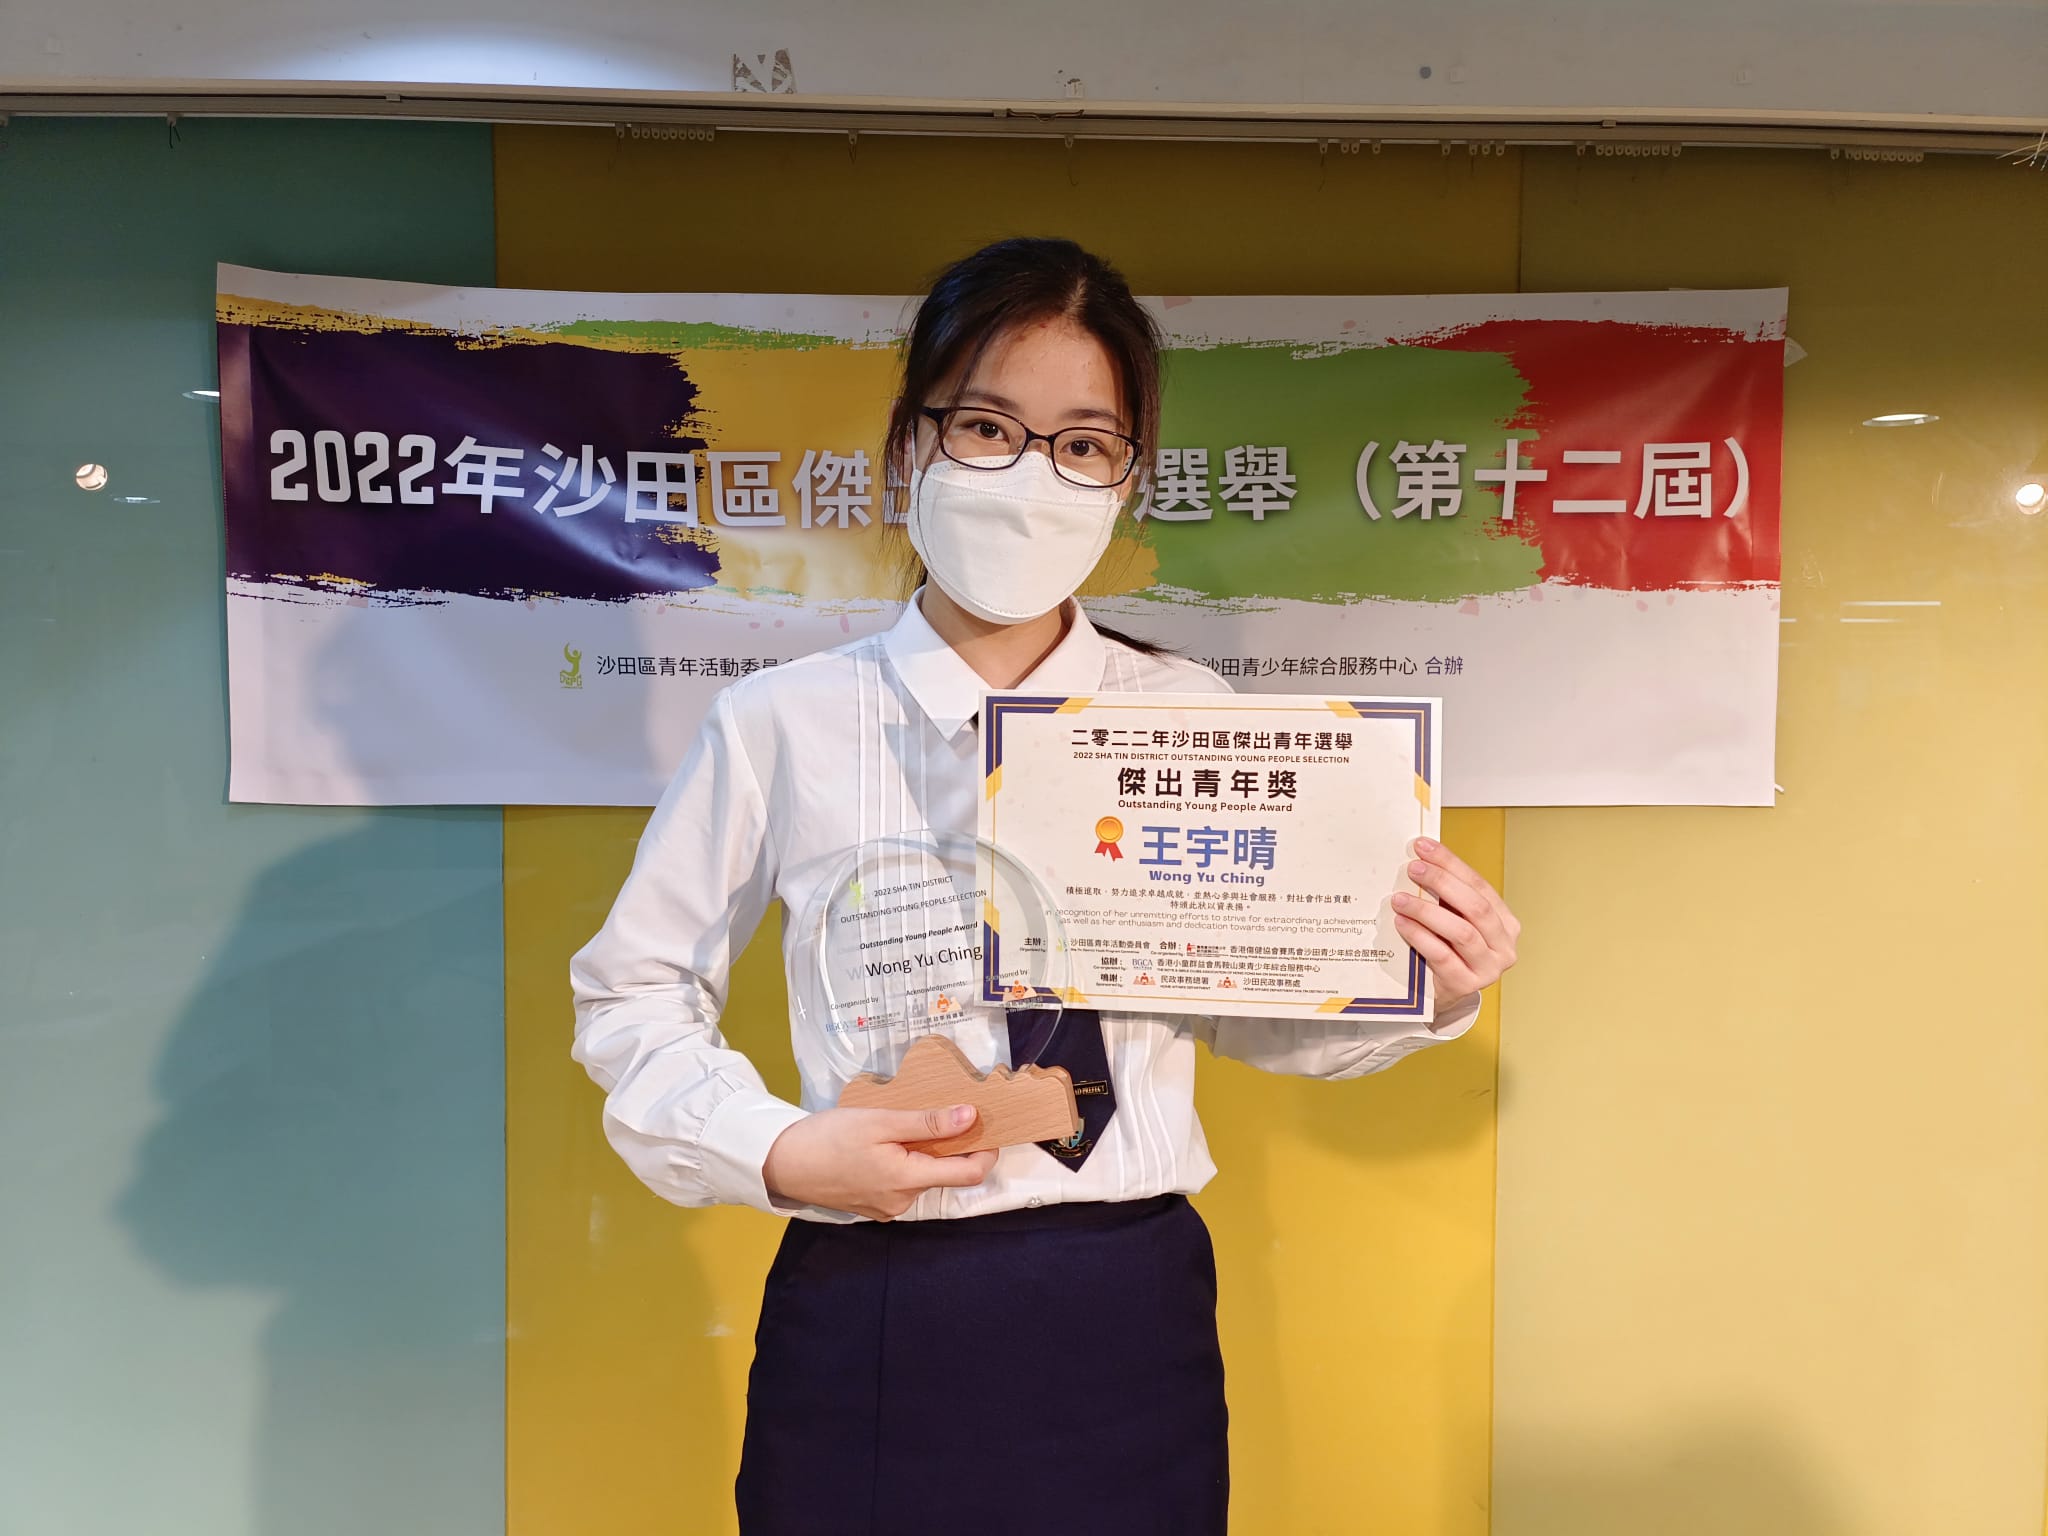 Pooikeinian awarded at Shatin District Outstanding Young People Selection 2022